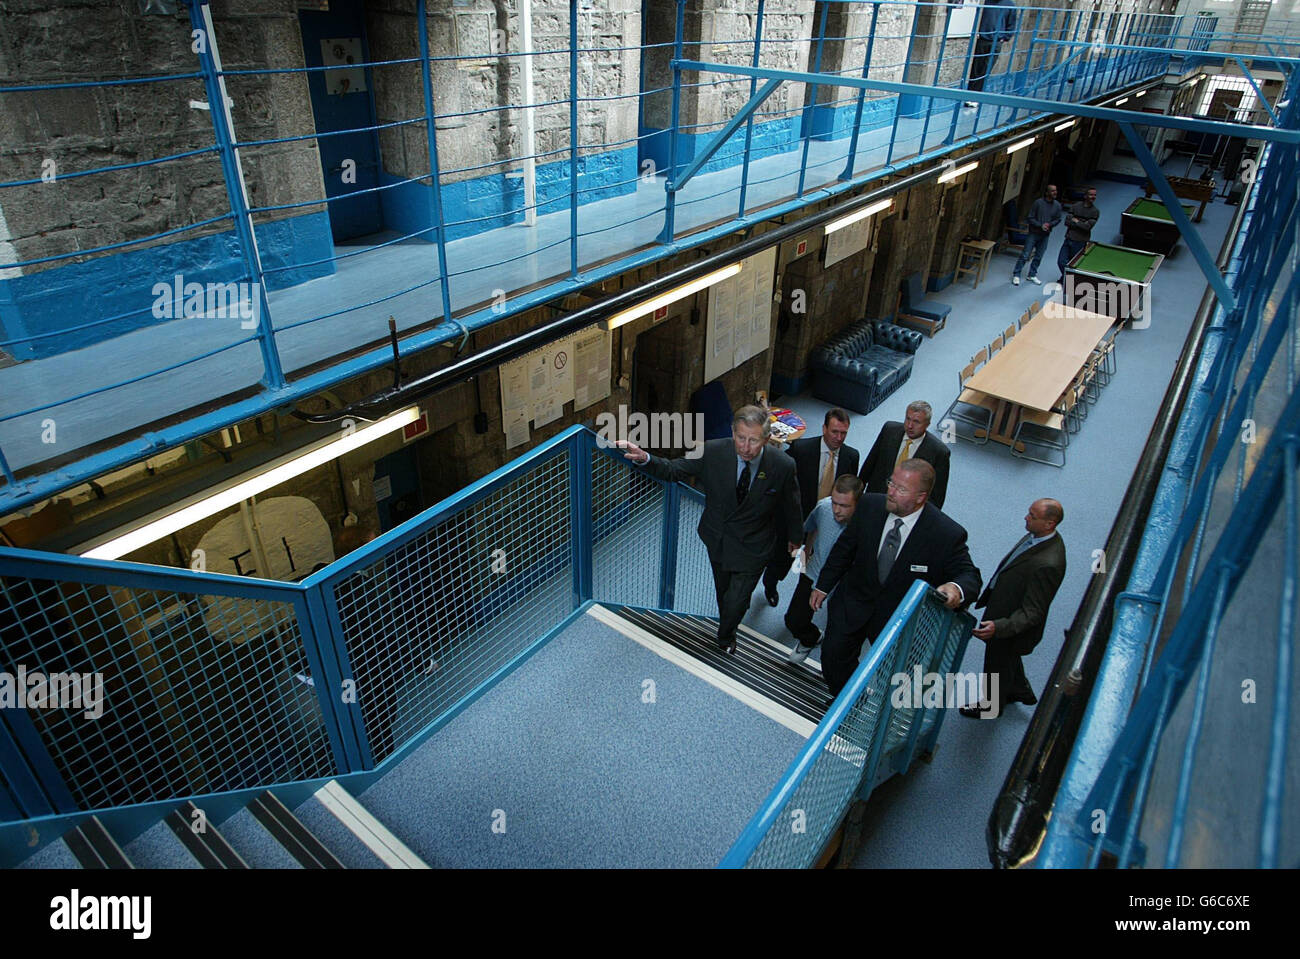 The Prince of Wales views the new resettlement assessment centre during a visit to Dartmoor Prison. The Prince of Wales had a taste of life behind bars when he visited the prison. * His first stop was a new workshop where he met prisoners taking part in a brick-laying course. The course is part of the prison's new programme, run in partnership with the local business community, which aims to prevent prisoners re-offending by teaching them work skills. The programme, launched in February, currently involves 16 prisoners in courses delivered by North Devon College. Stock Photo